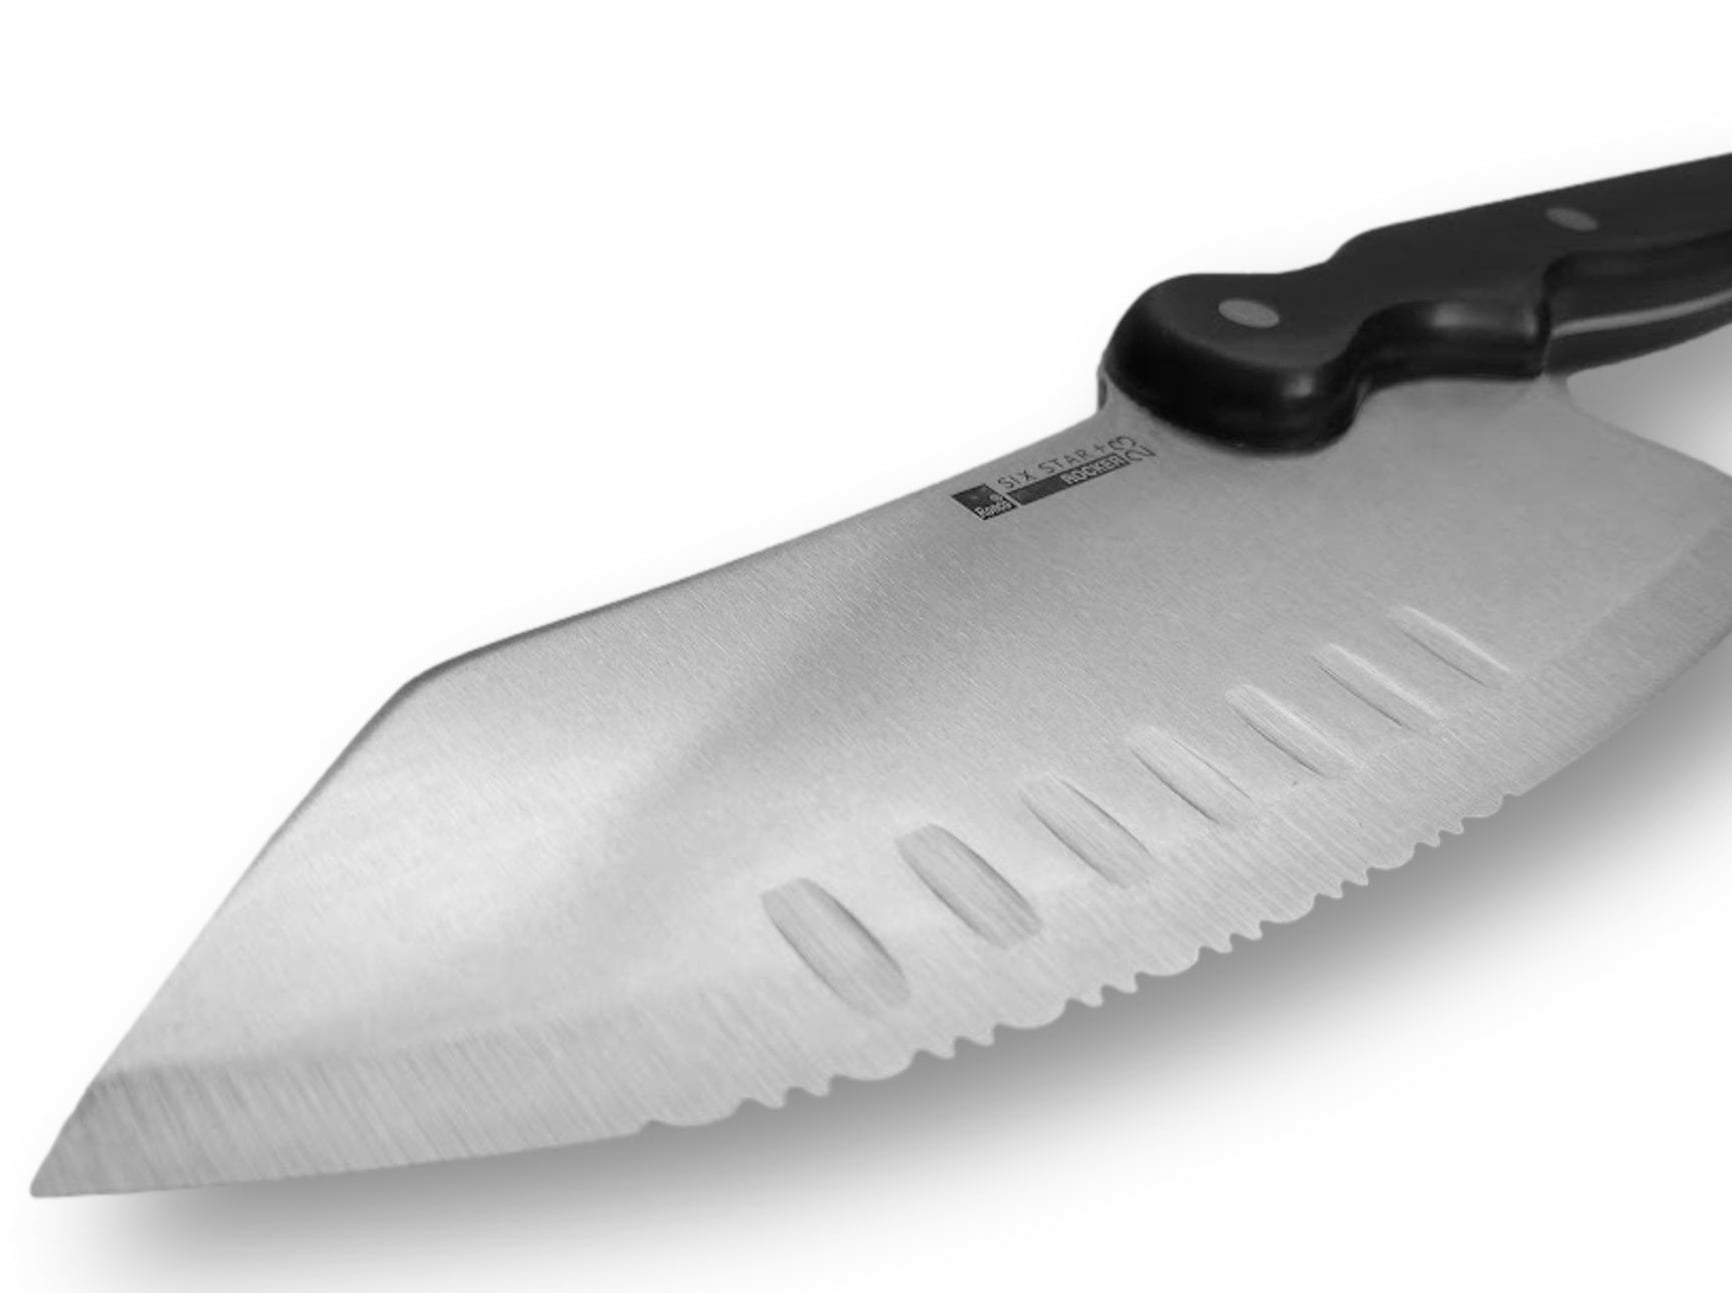  Ronco Six Star+ Professional Carving Knife (#2) Style